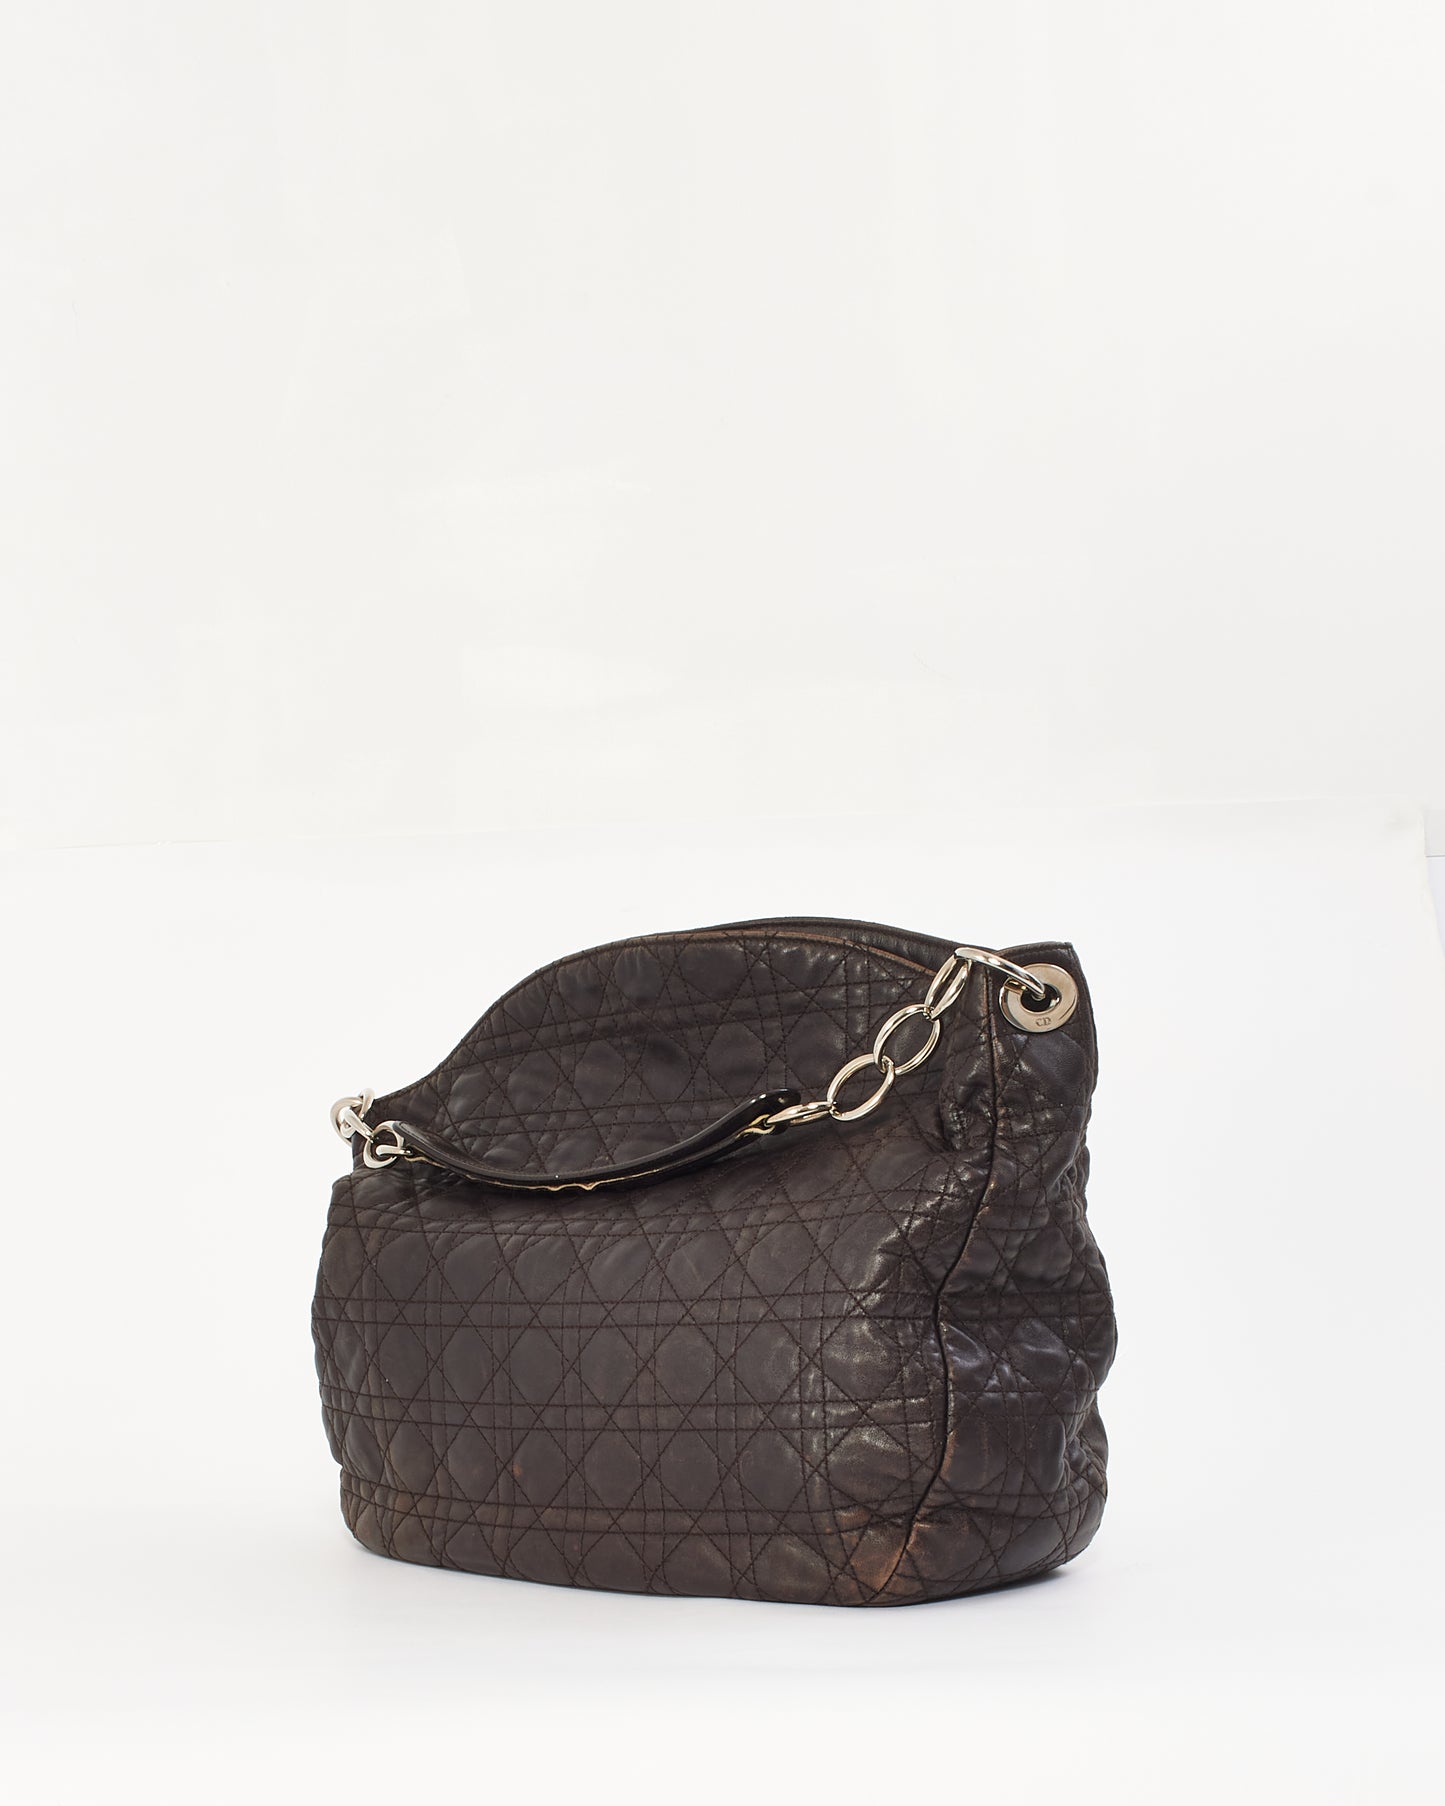 Dior Brown Lambskin Cannage Leather Soft Hobo Bag